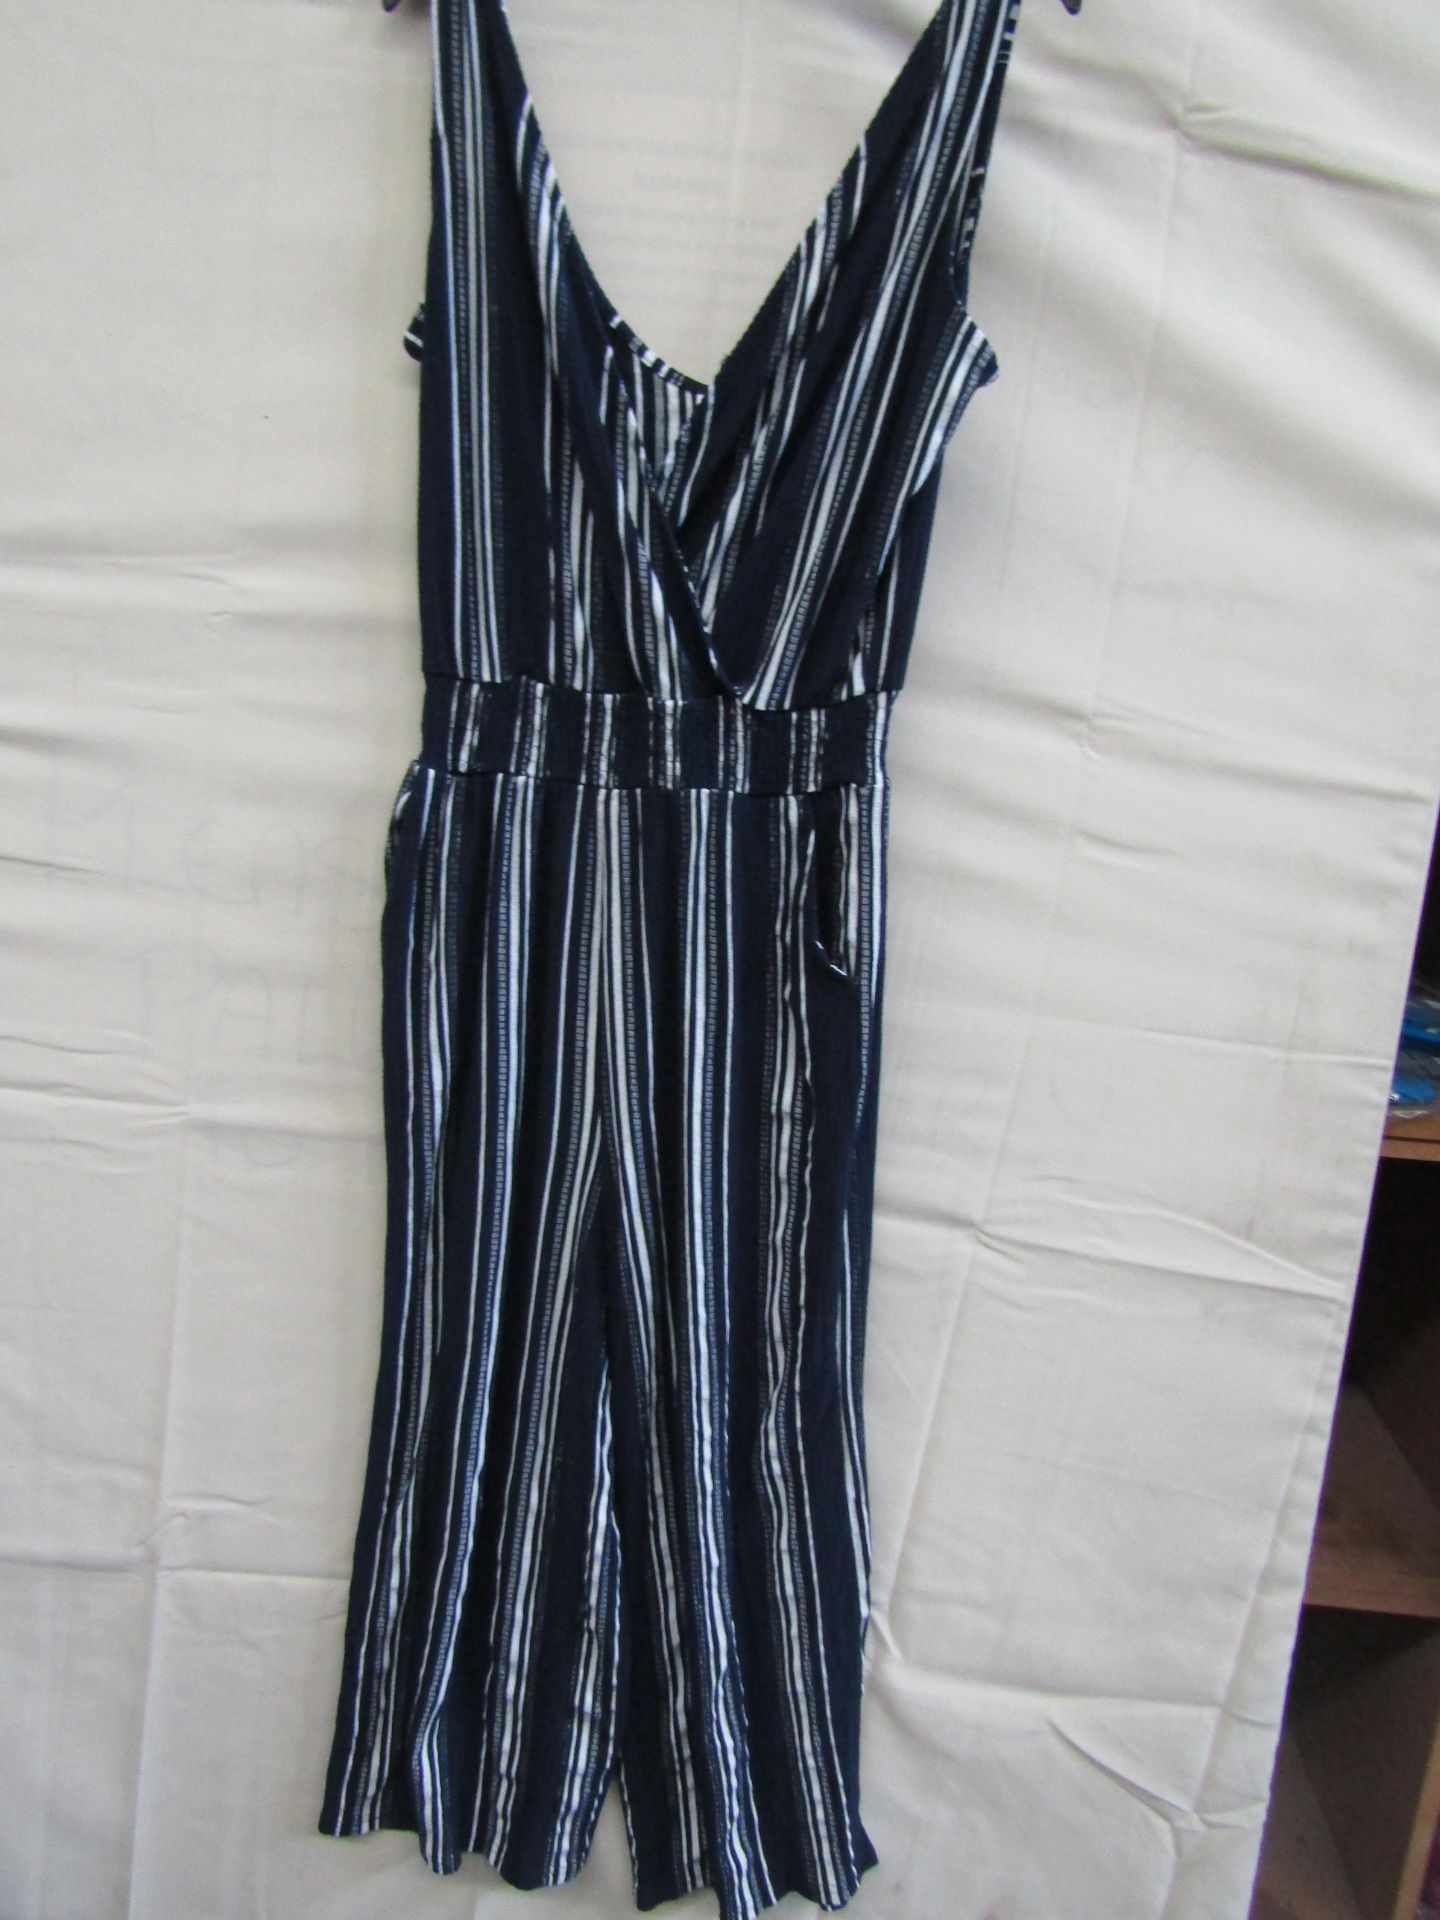 Lascana 3/4 Length Navy Stripe Jumpsuit Size 10 ( May Have Been Worn ) No Tags Very Good Condition